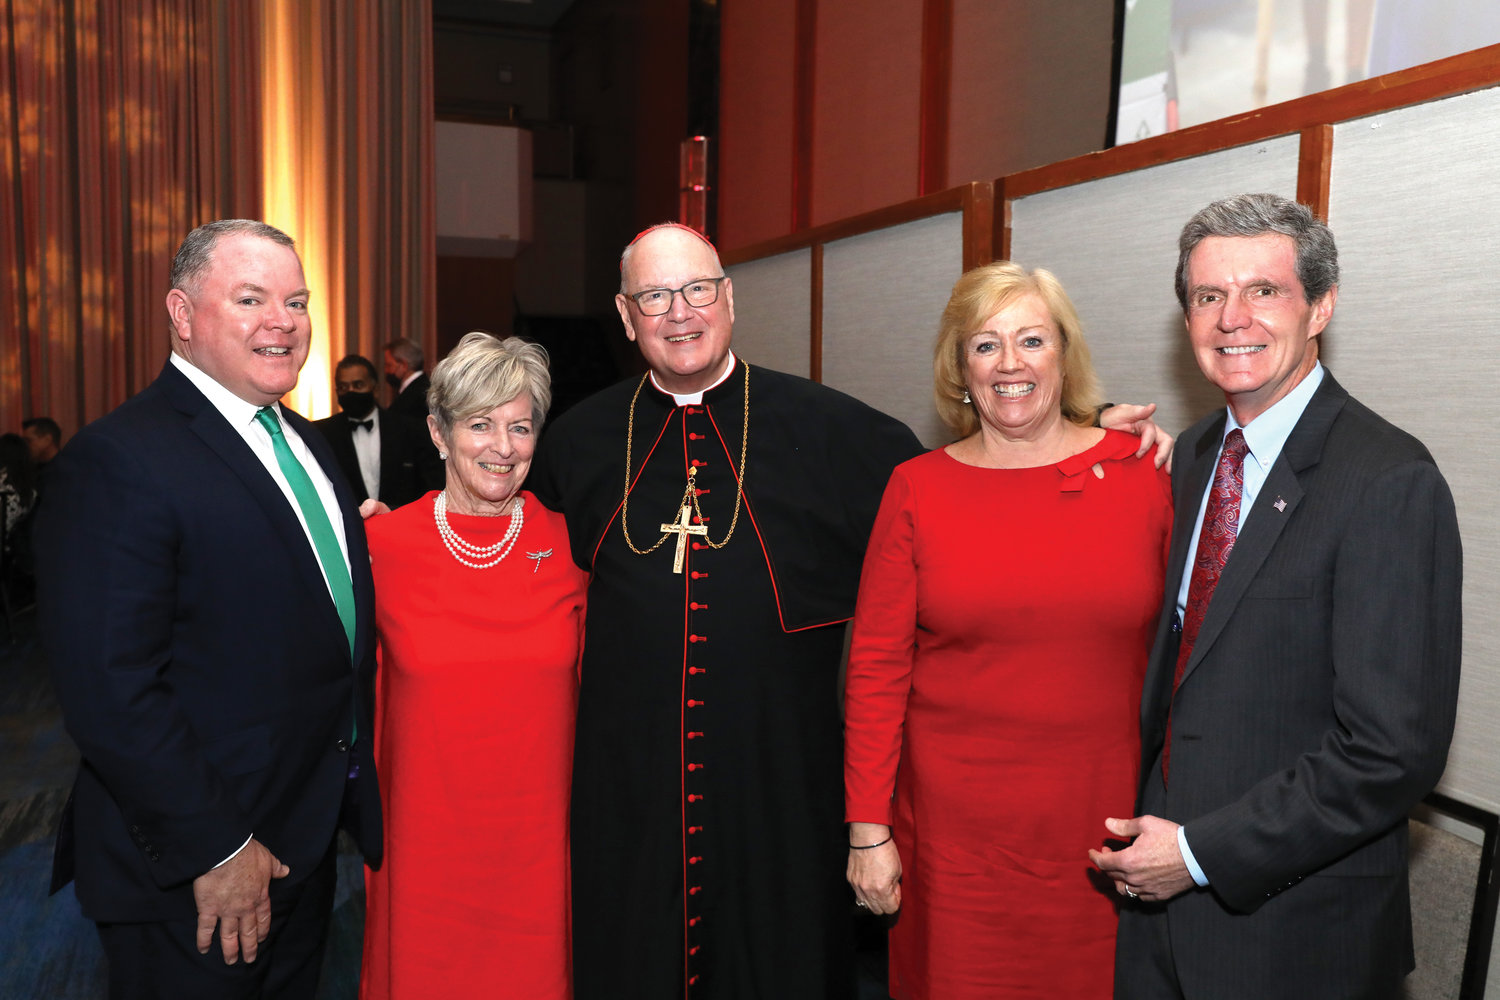 Cardinal Dolan greets honorees at the Cardinal’s Christmas Luncheon Dec. 1 at the New York Hilton Midtown. Second from left was Joan B. O’Connor, who received the Christmas Angel Award, accompanied by her son Bill, and, at right, Kathleen and John McAvoy, who were recognized with the Spirit of St. Nicholas Award.